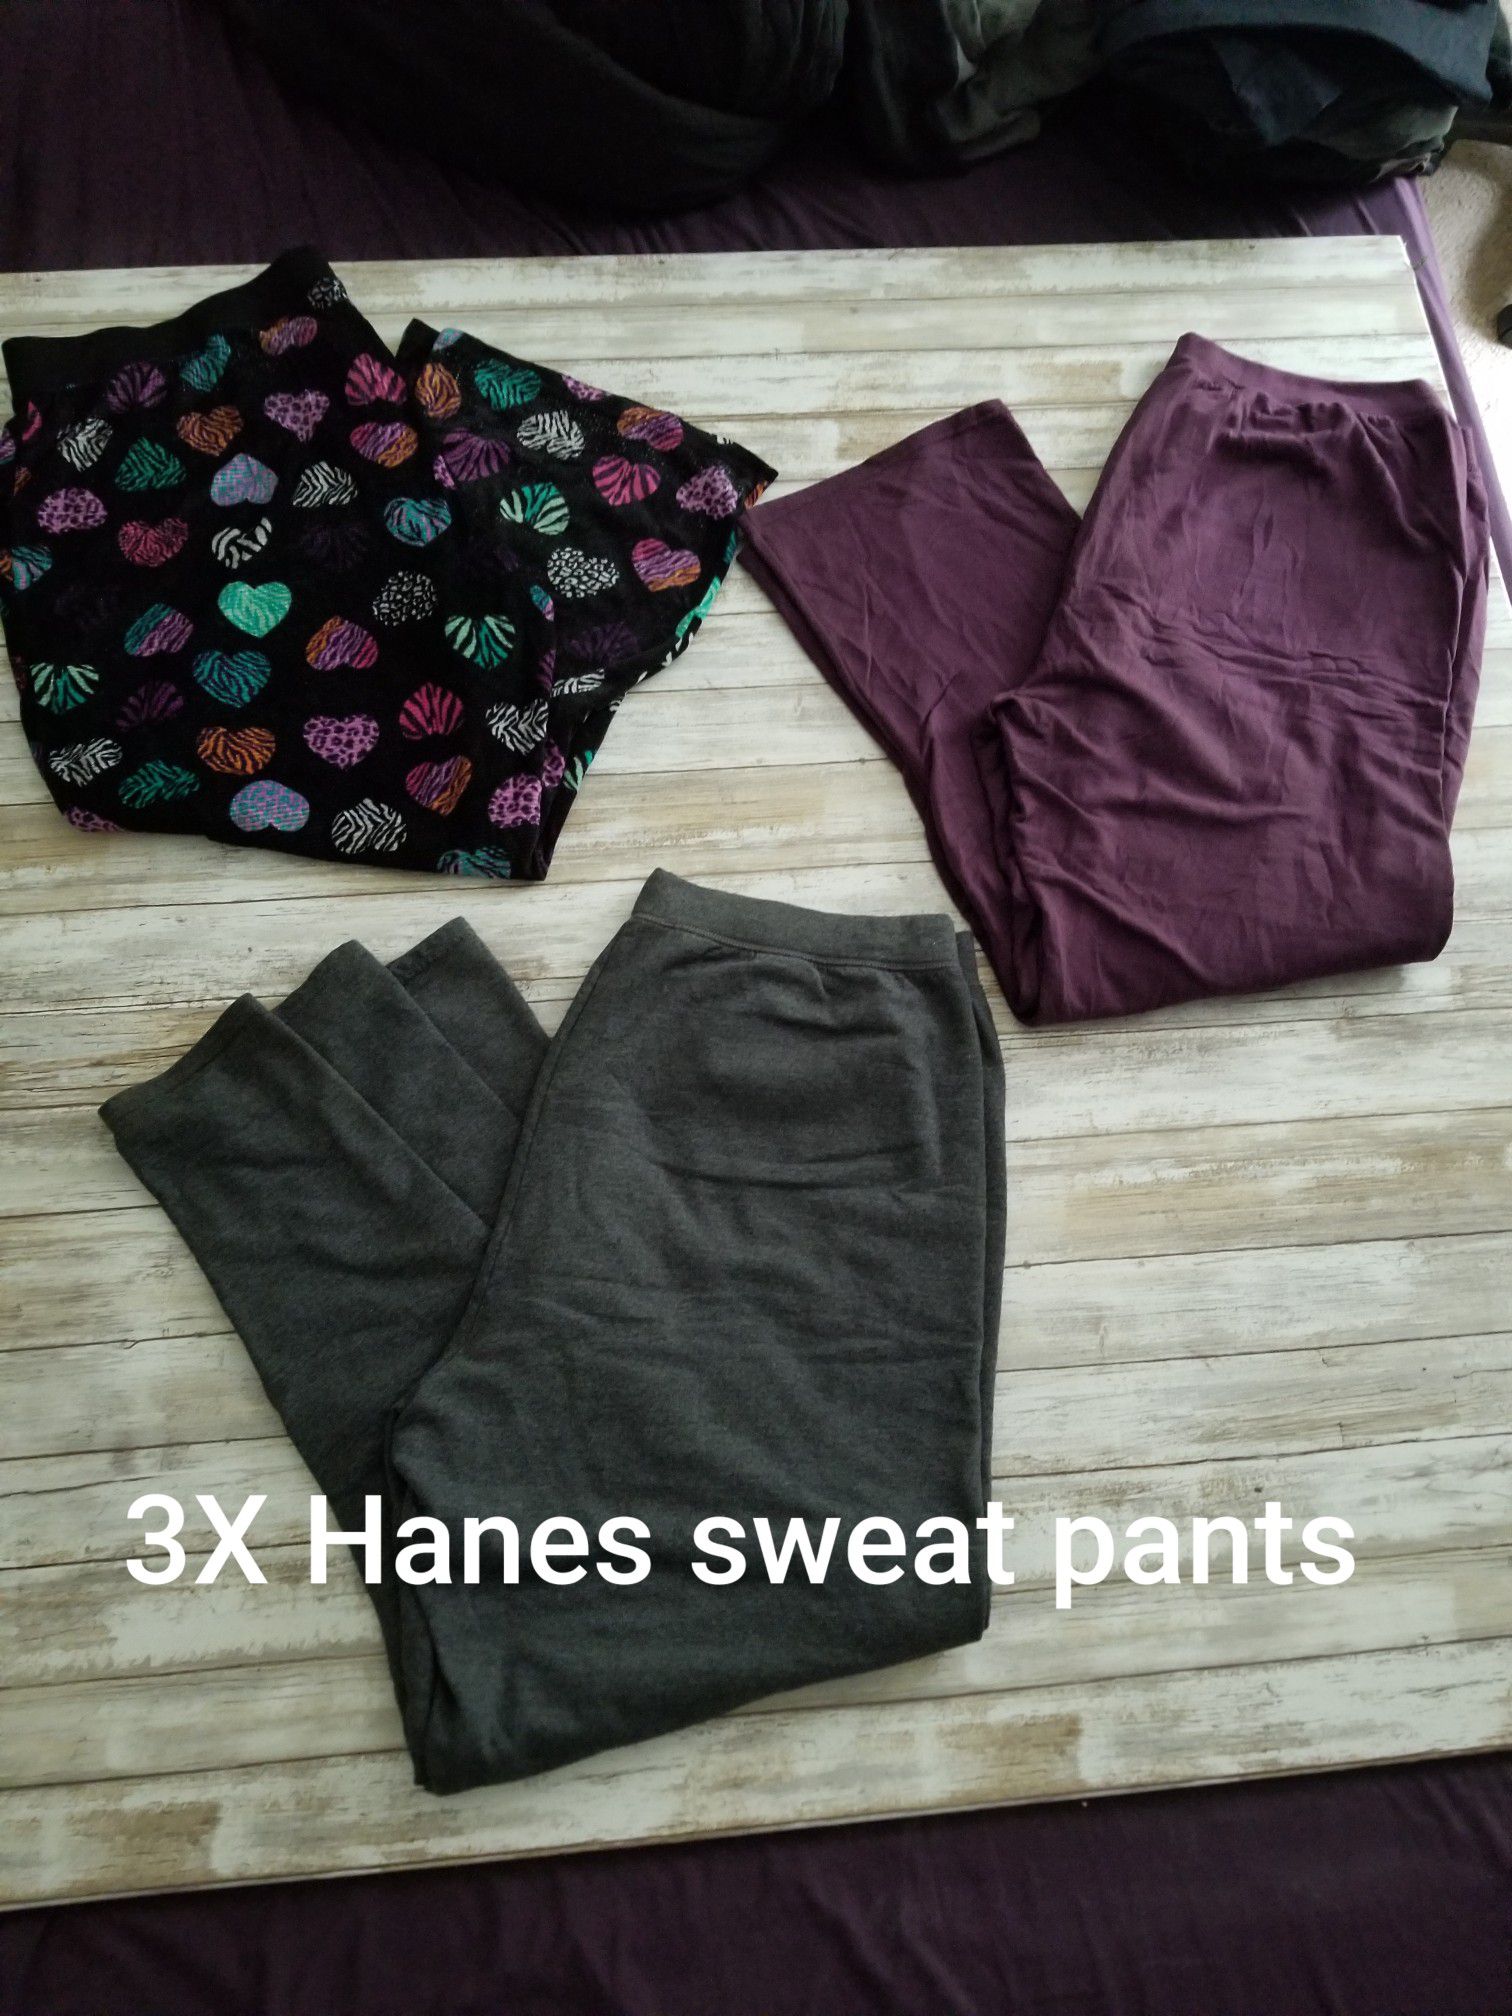 Size 3x Hanes sweatpants (all 3 pairs for $5)